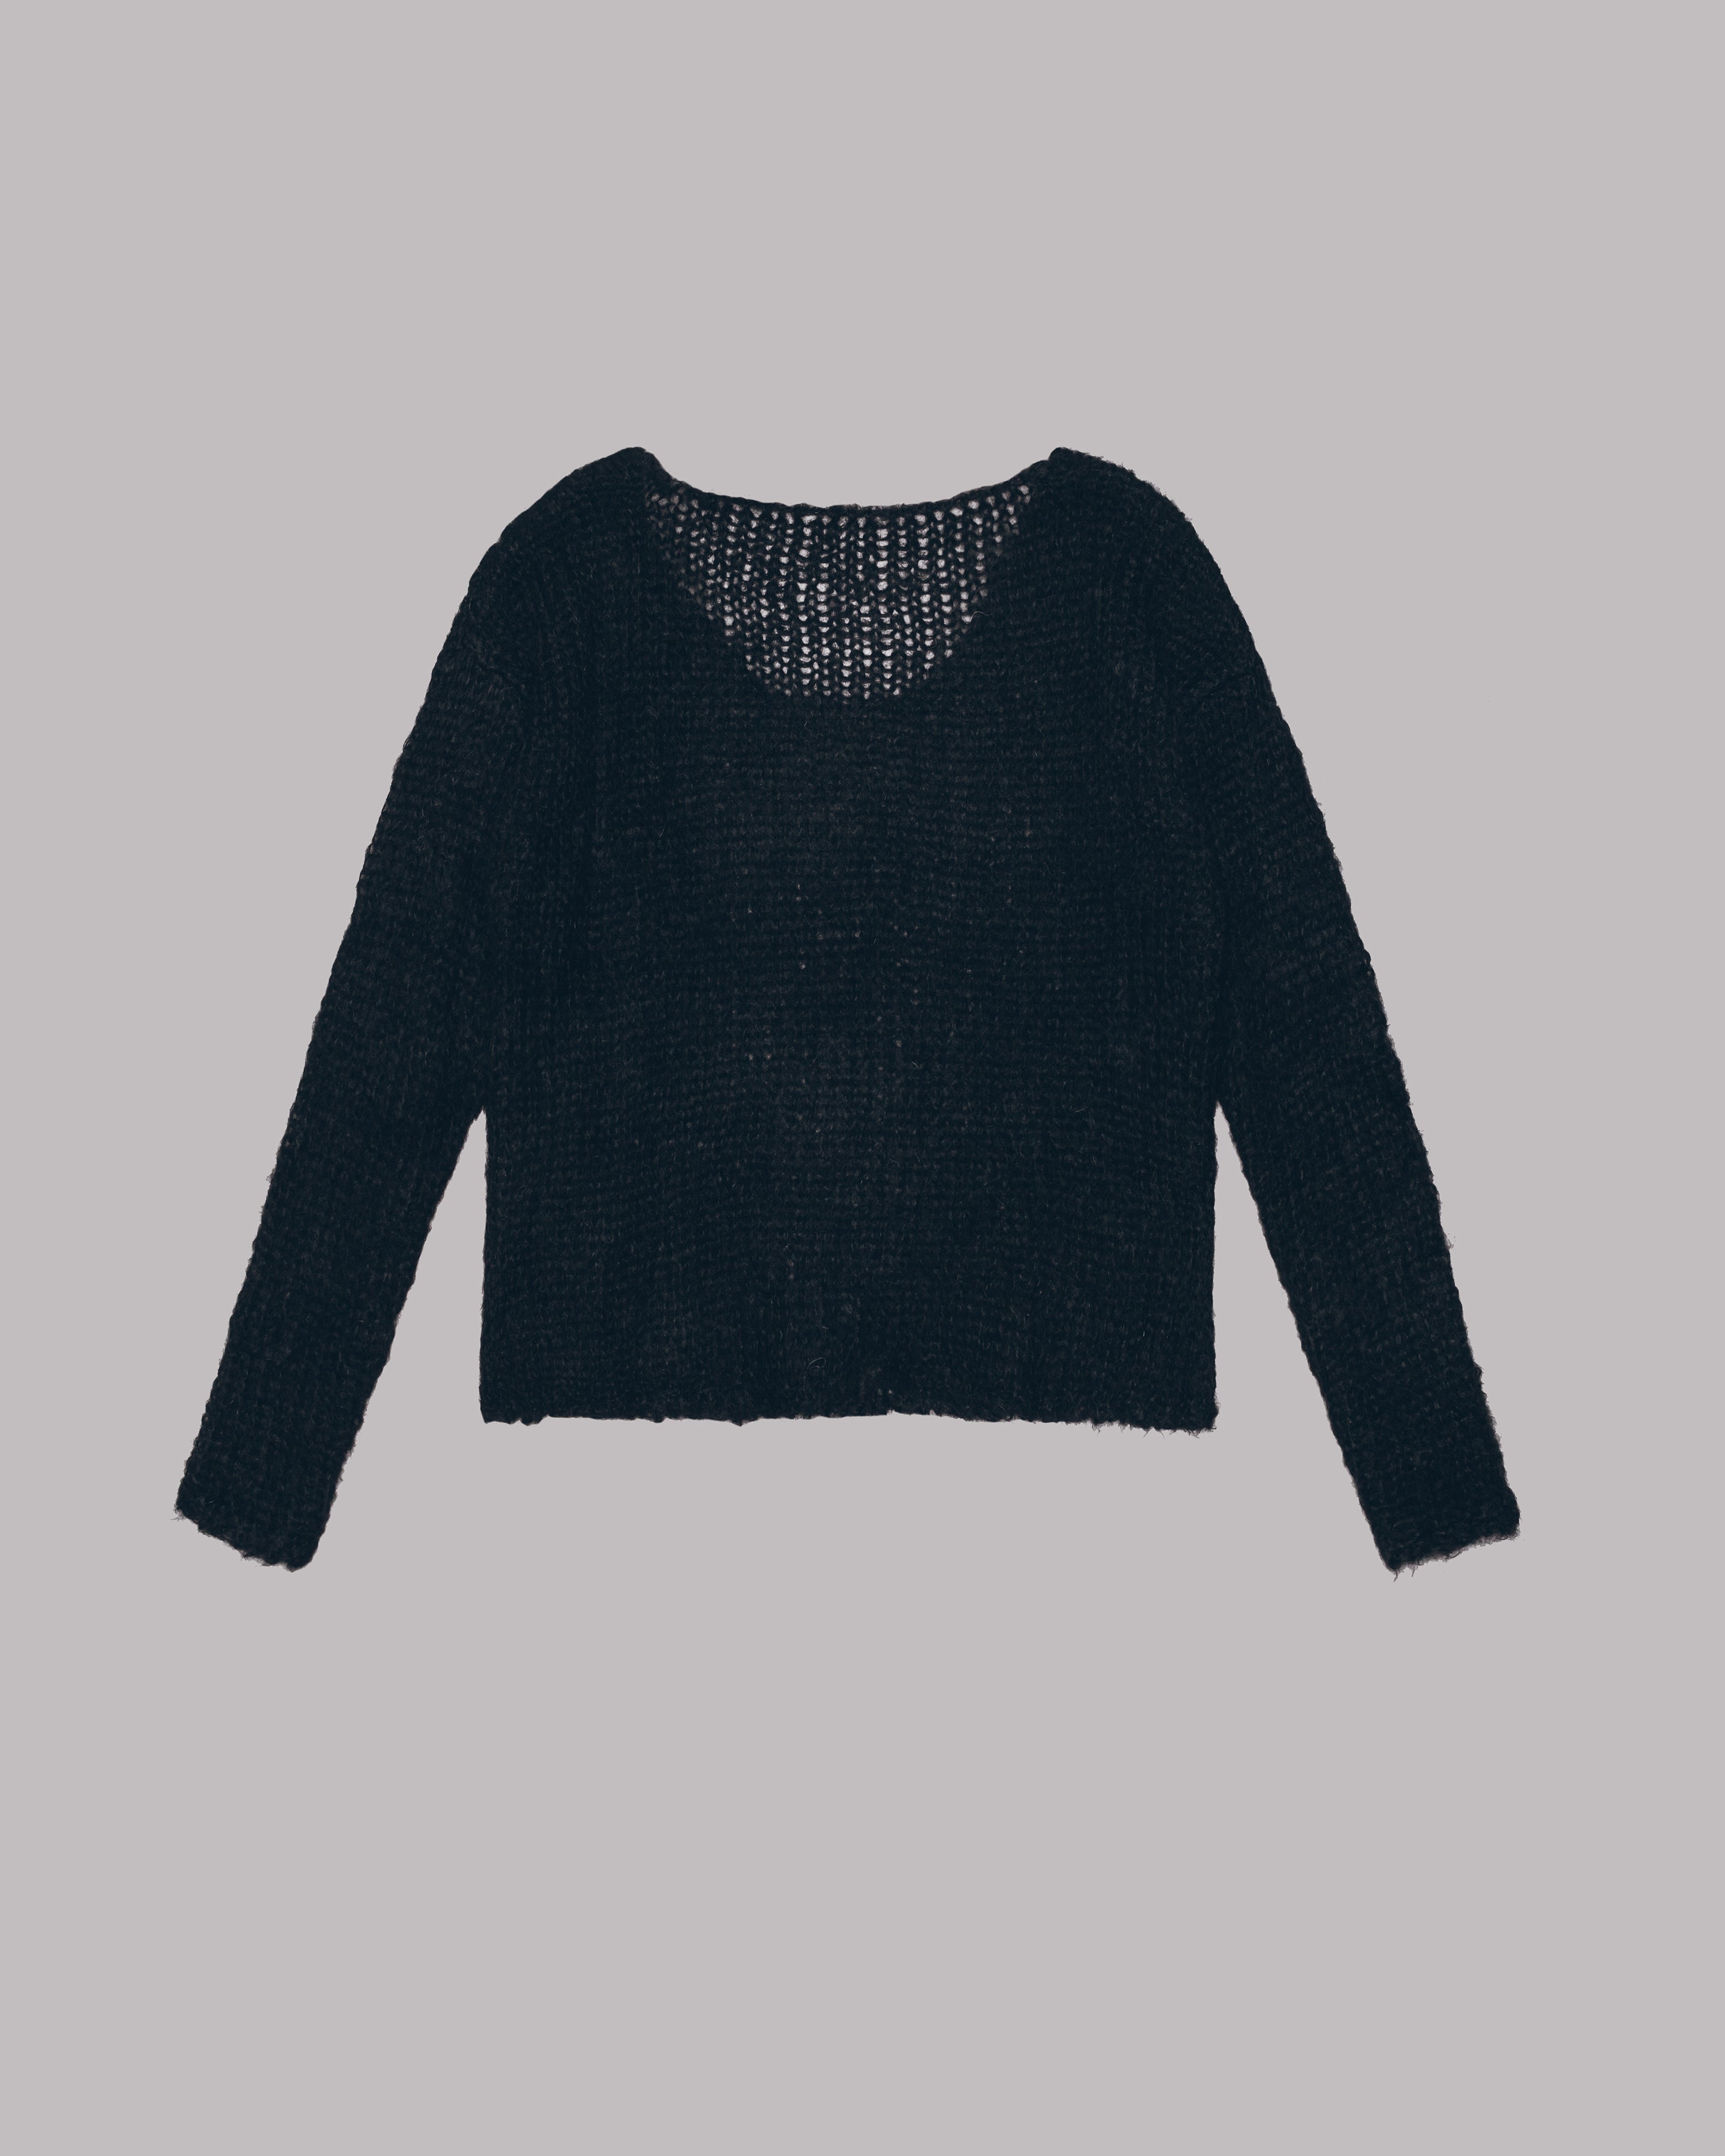 The Black Mohair Knitted Sweater